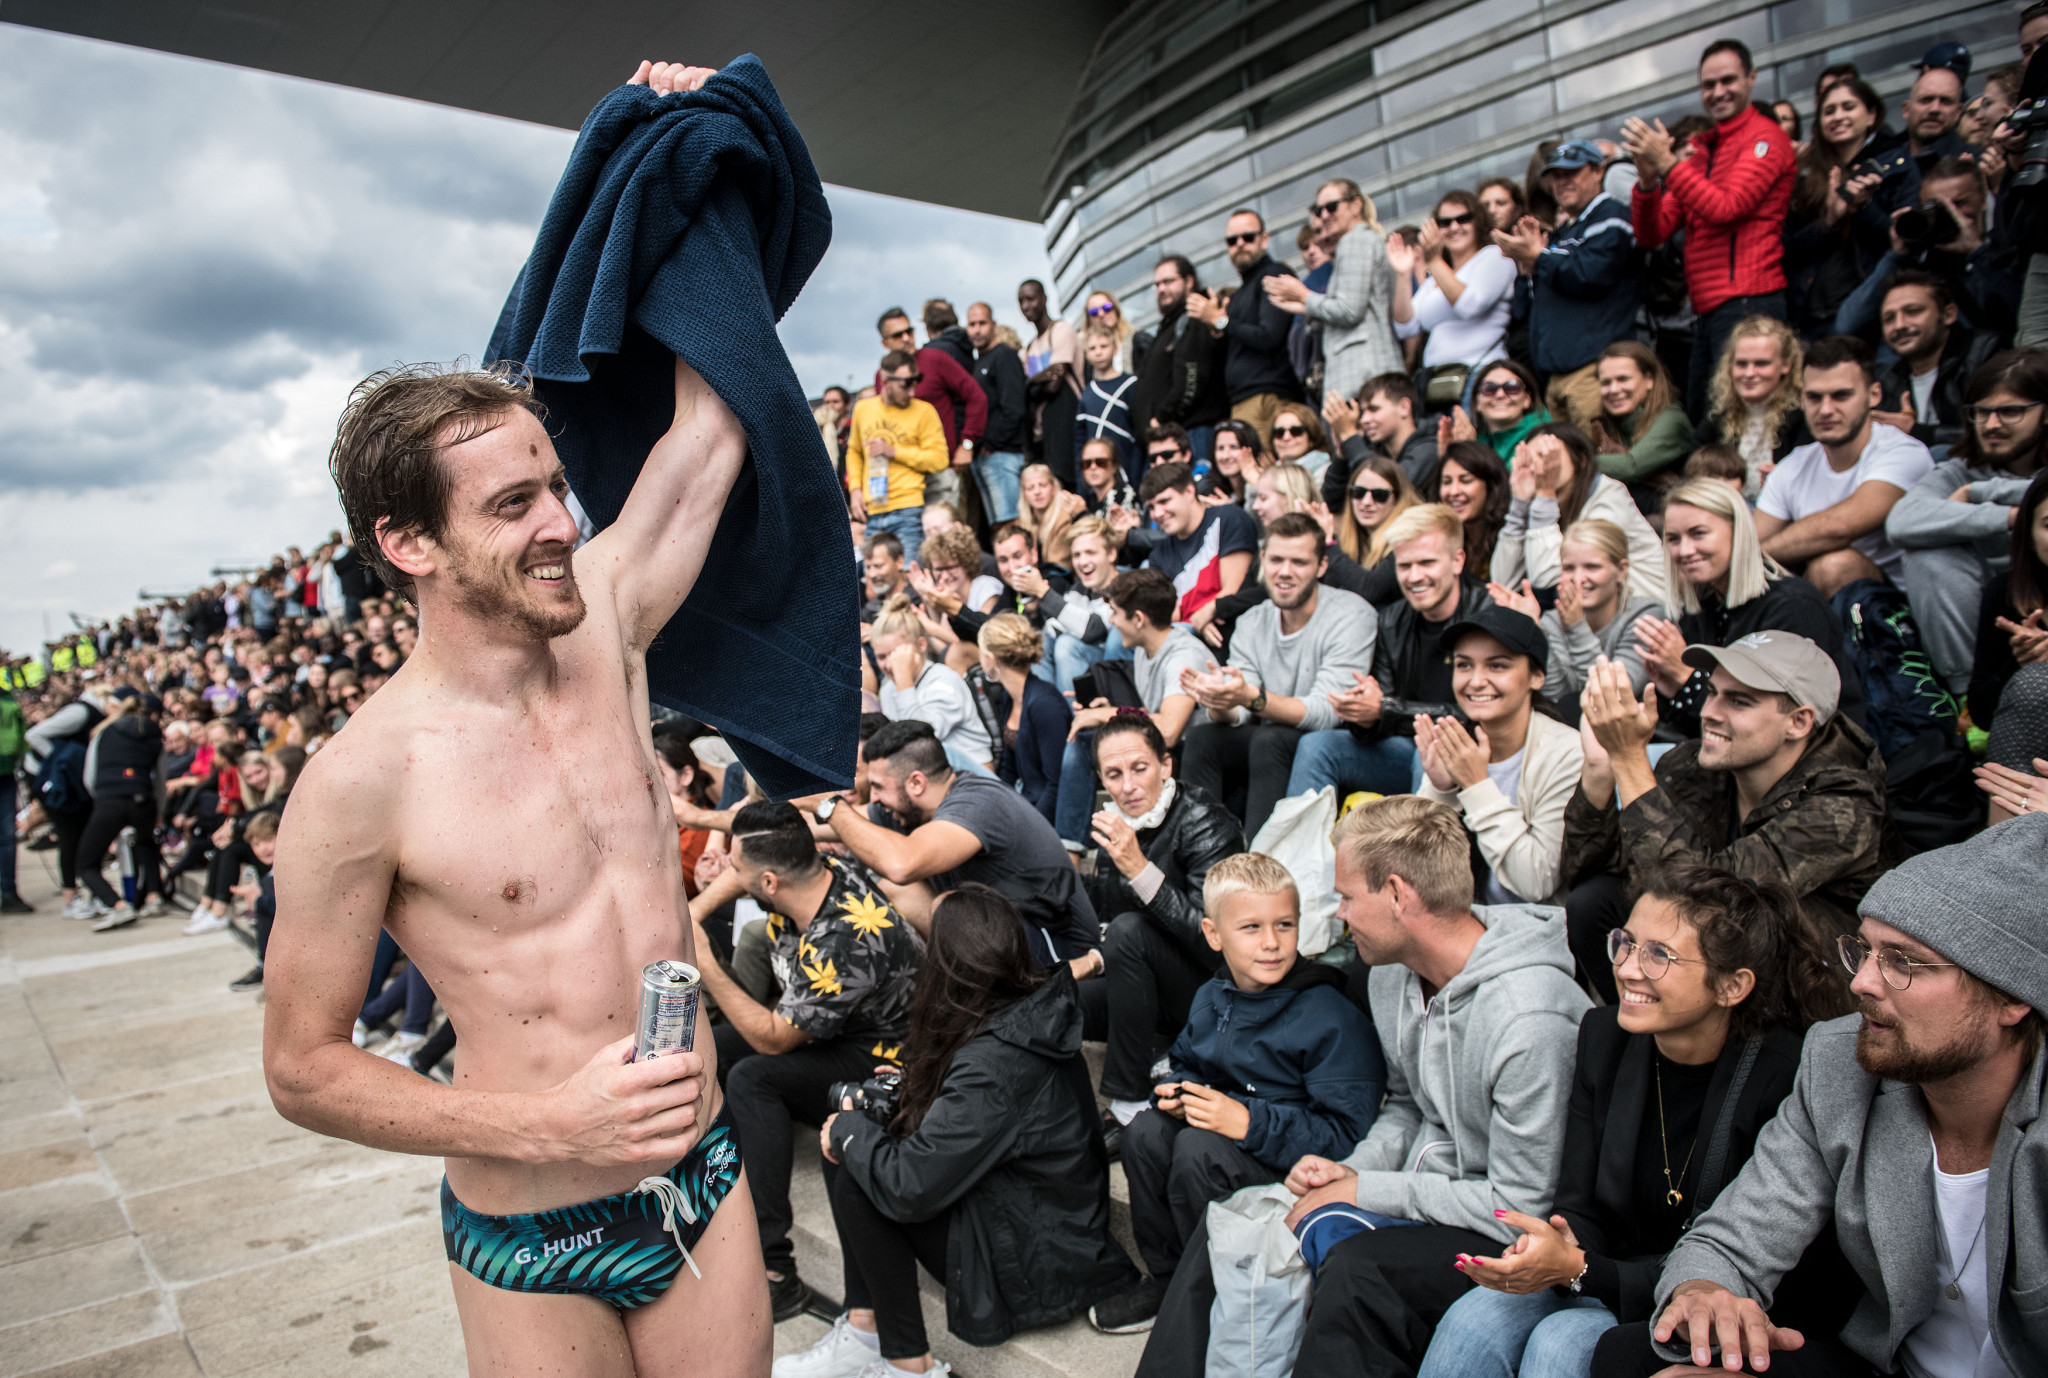 Champions crowned at FINA High Diving World Cup in Abu Dhabi